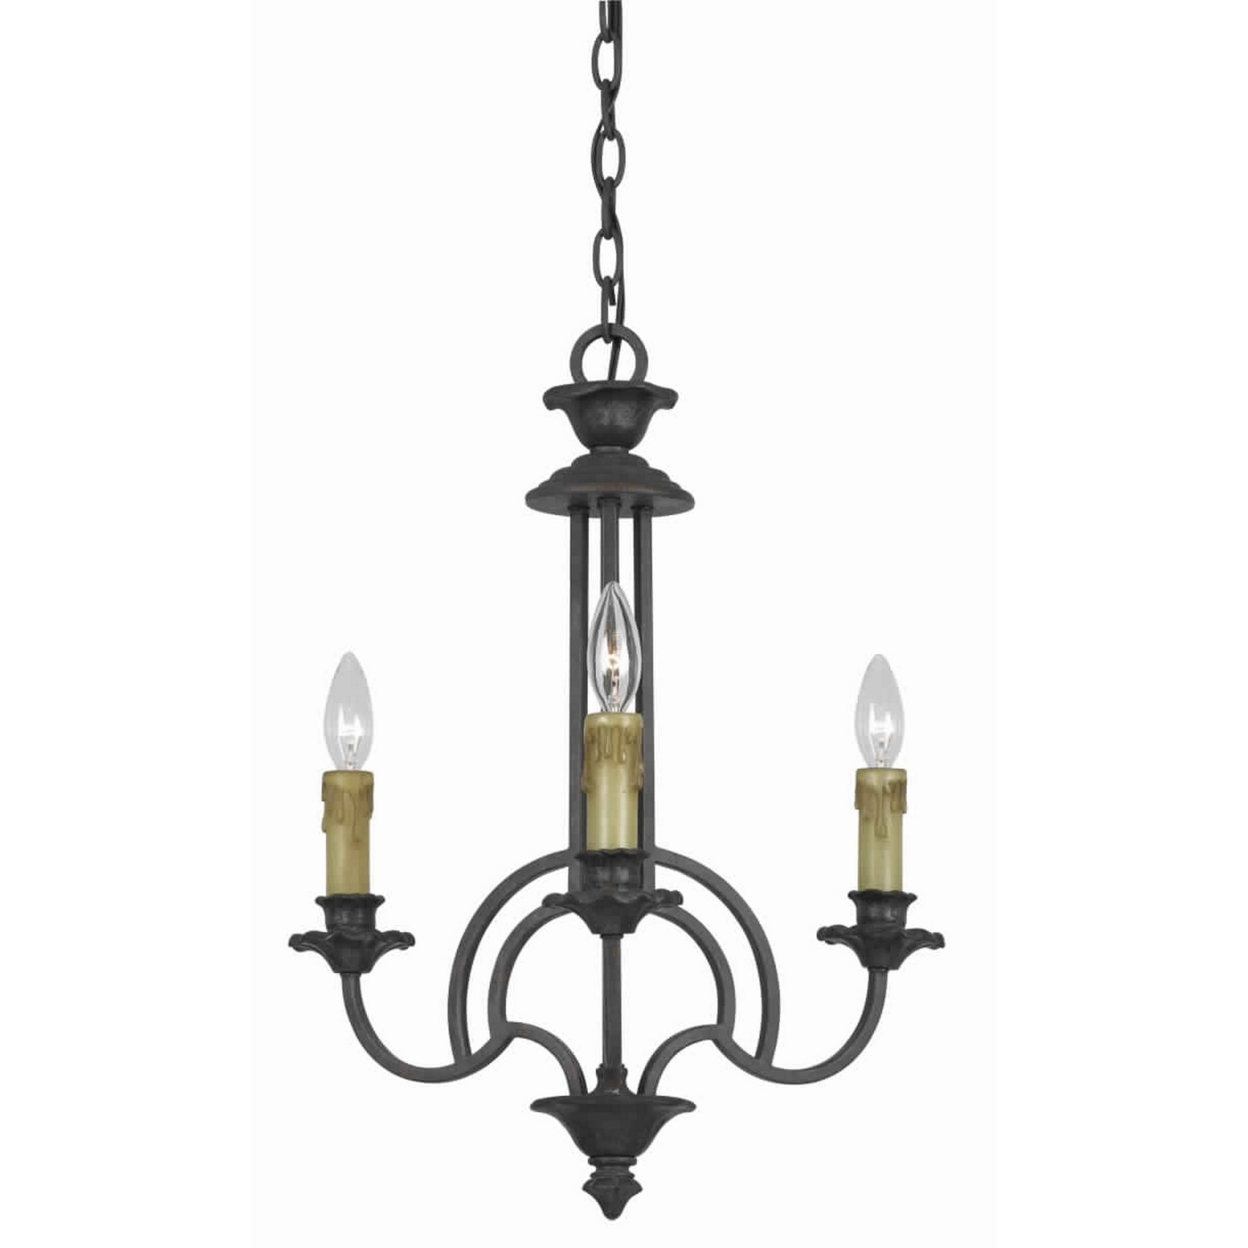 3 Bulb Candle Style Uplight Chandelier With Metal Frame, Black And Brass- Saltoro Sherpi